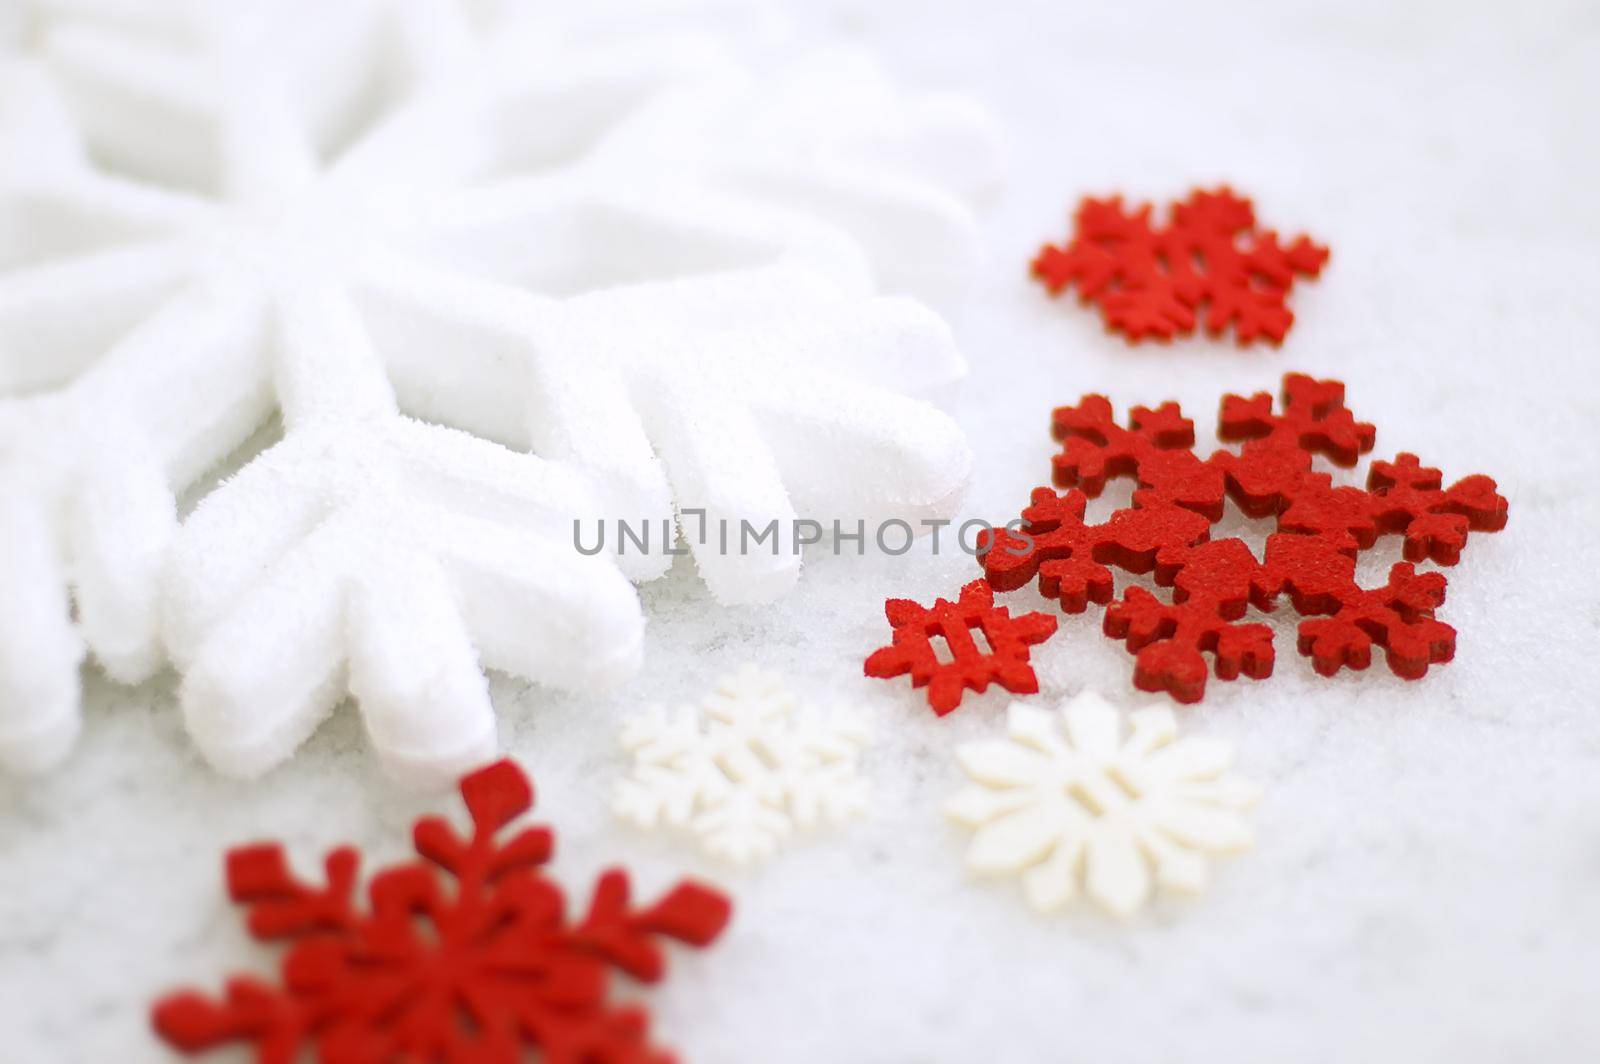 winter decor snowflakes white and red. High quality photo